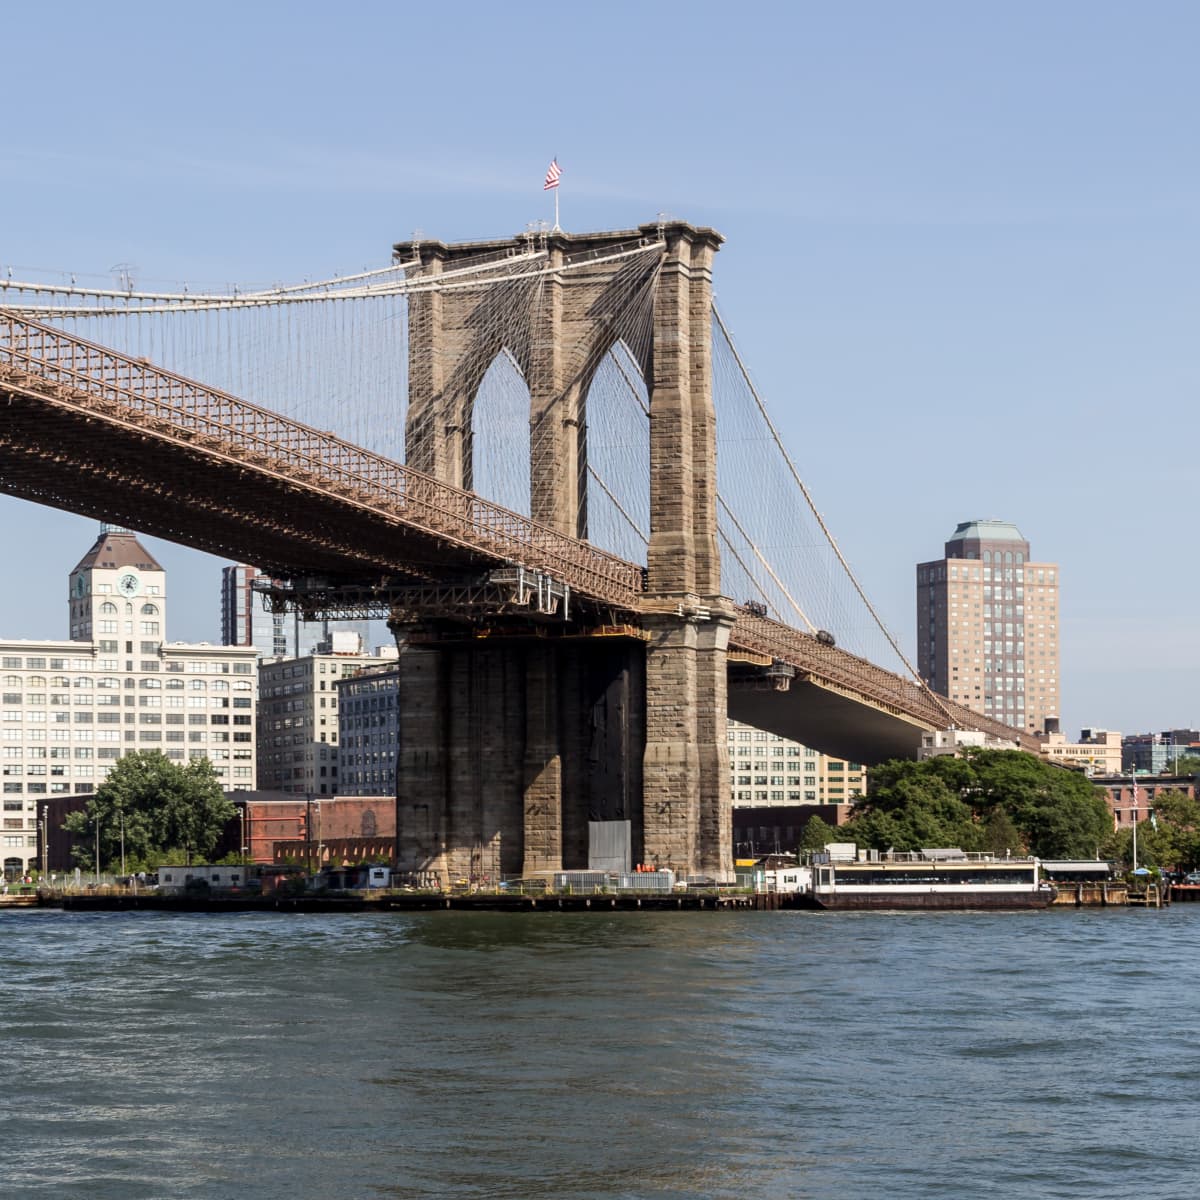 Moving to Brooklyn? Here Are 12 Things to Know